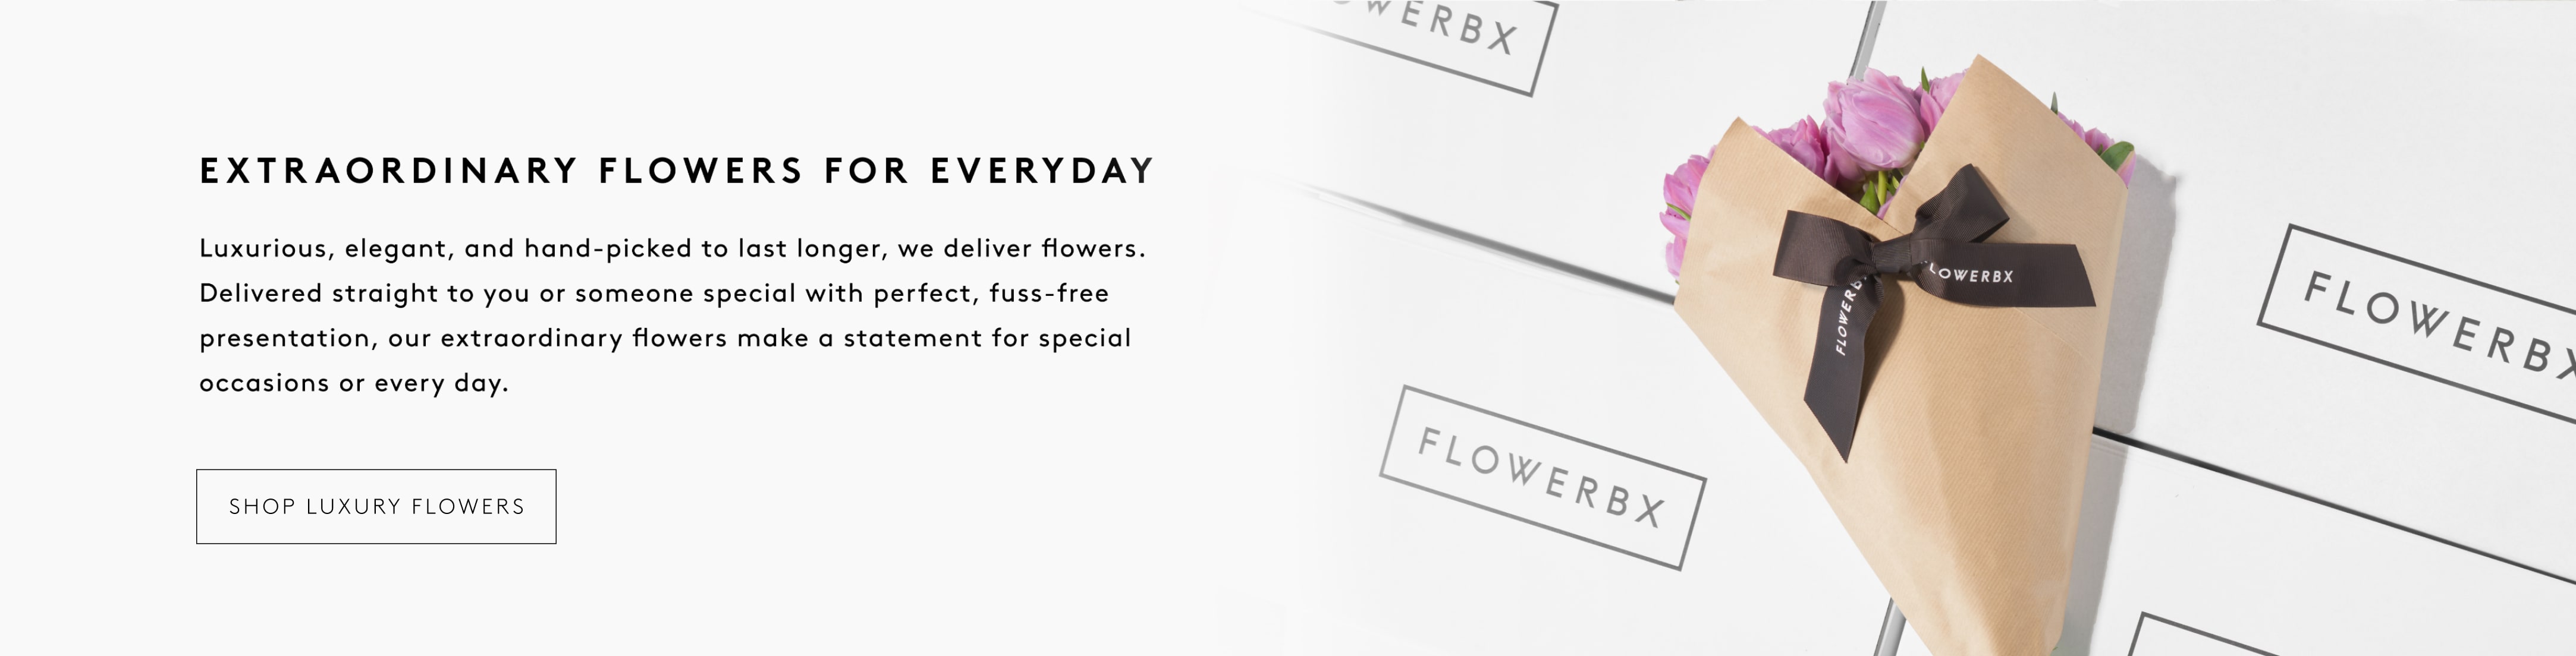 Extraordinary Flowers Delivered